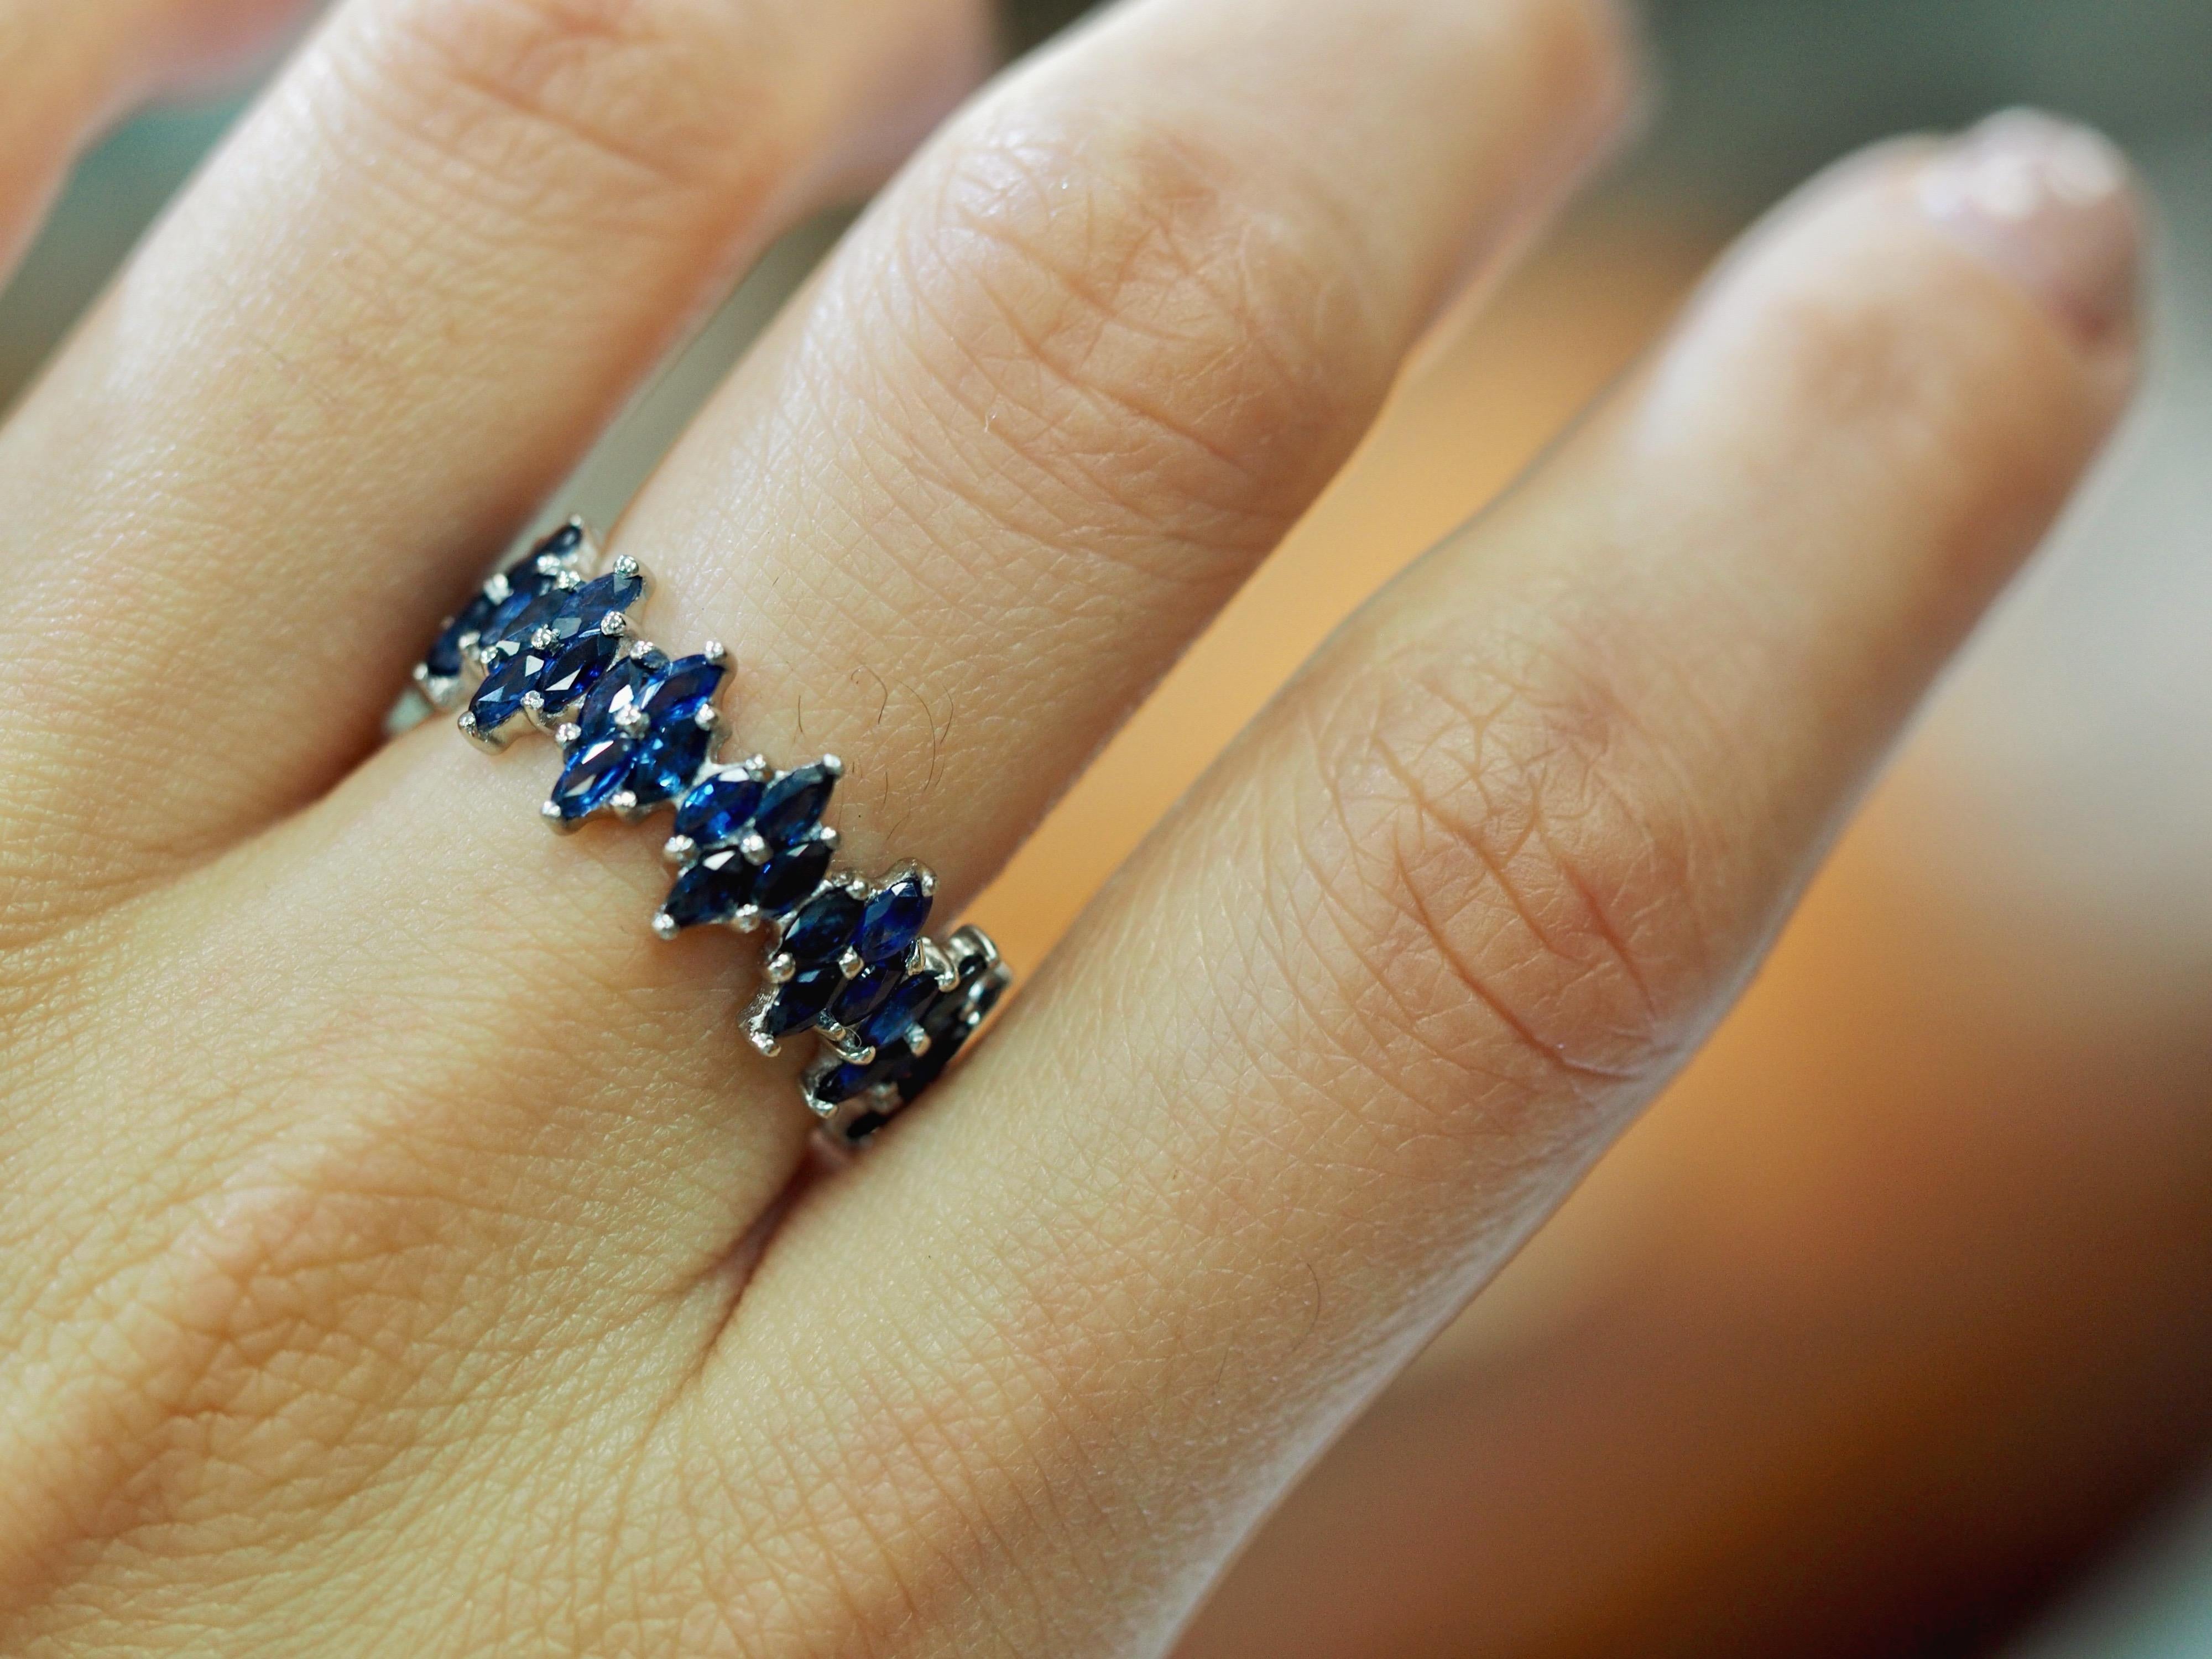 Here we have a vintage Art Deco marquise sapphire eternity band! The shimmering sapphire clusters are set together like little starbursts of color all around the stunning platinum band. This is a fun piece all on its own, but pairs wonderfully with